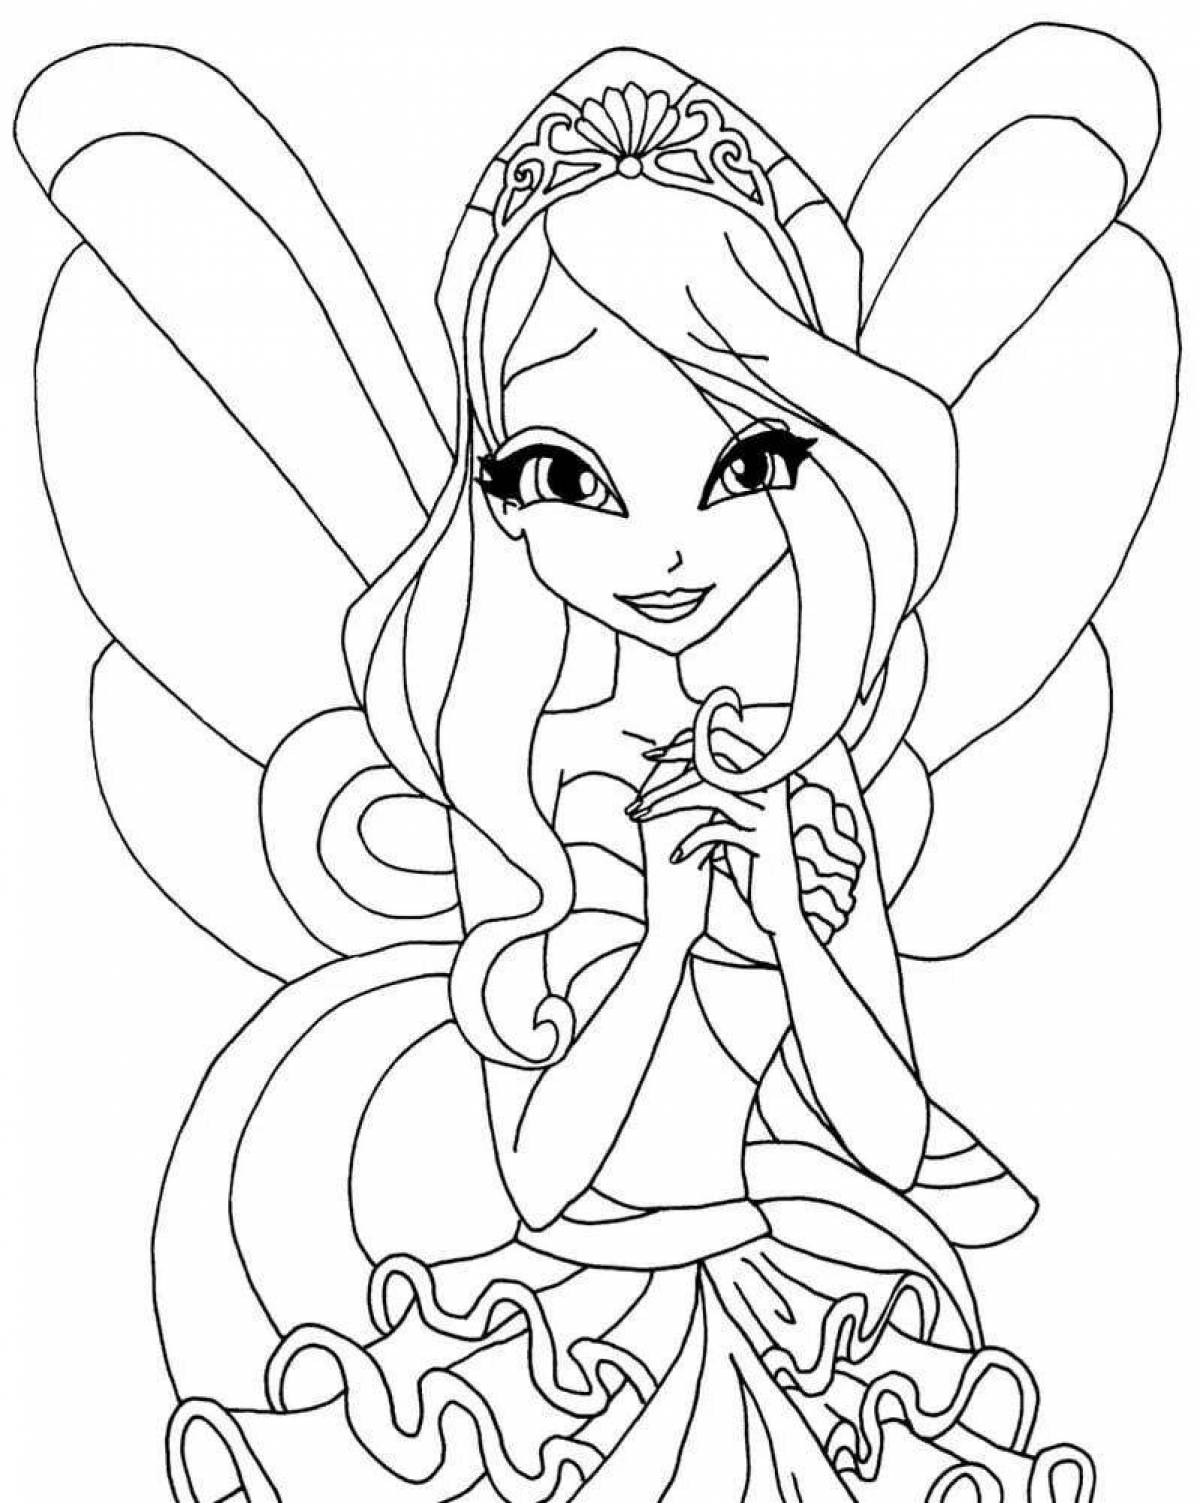 Glowing winx coloring book for kids